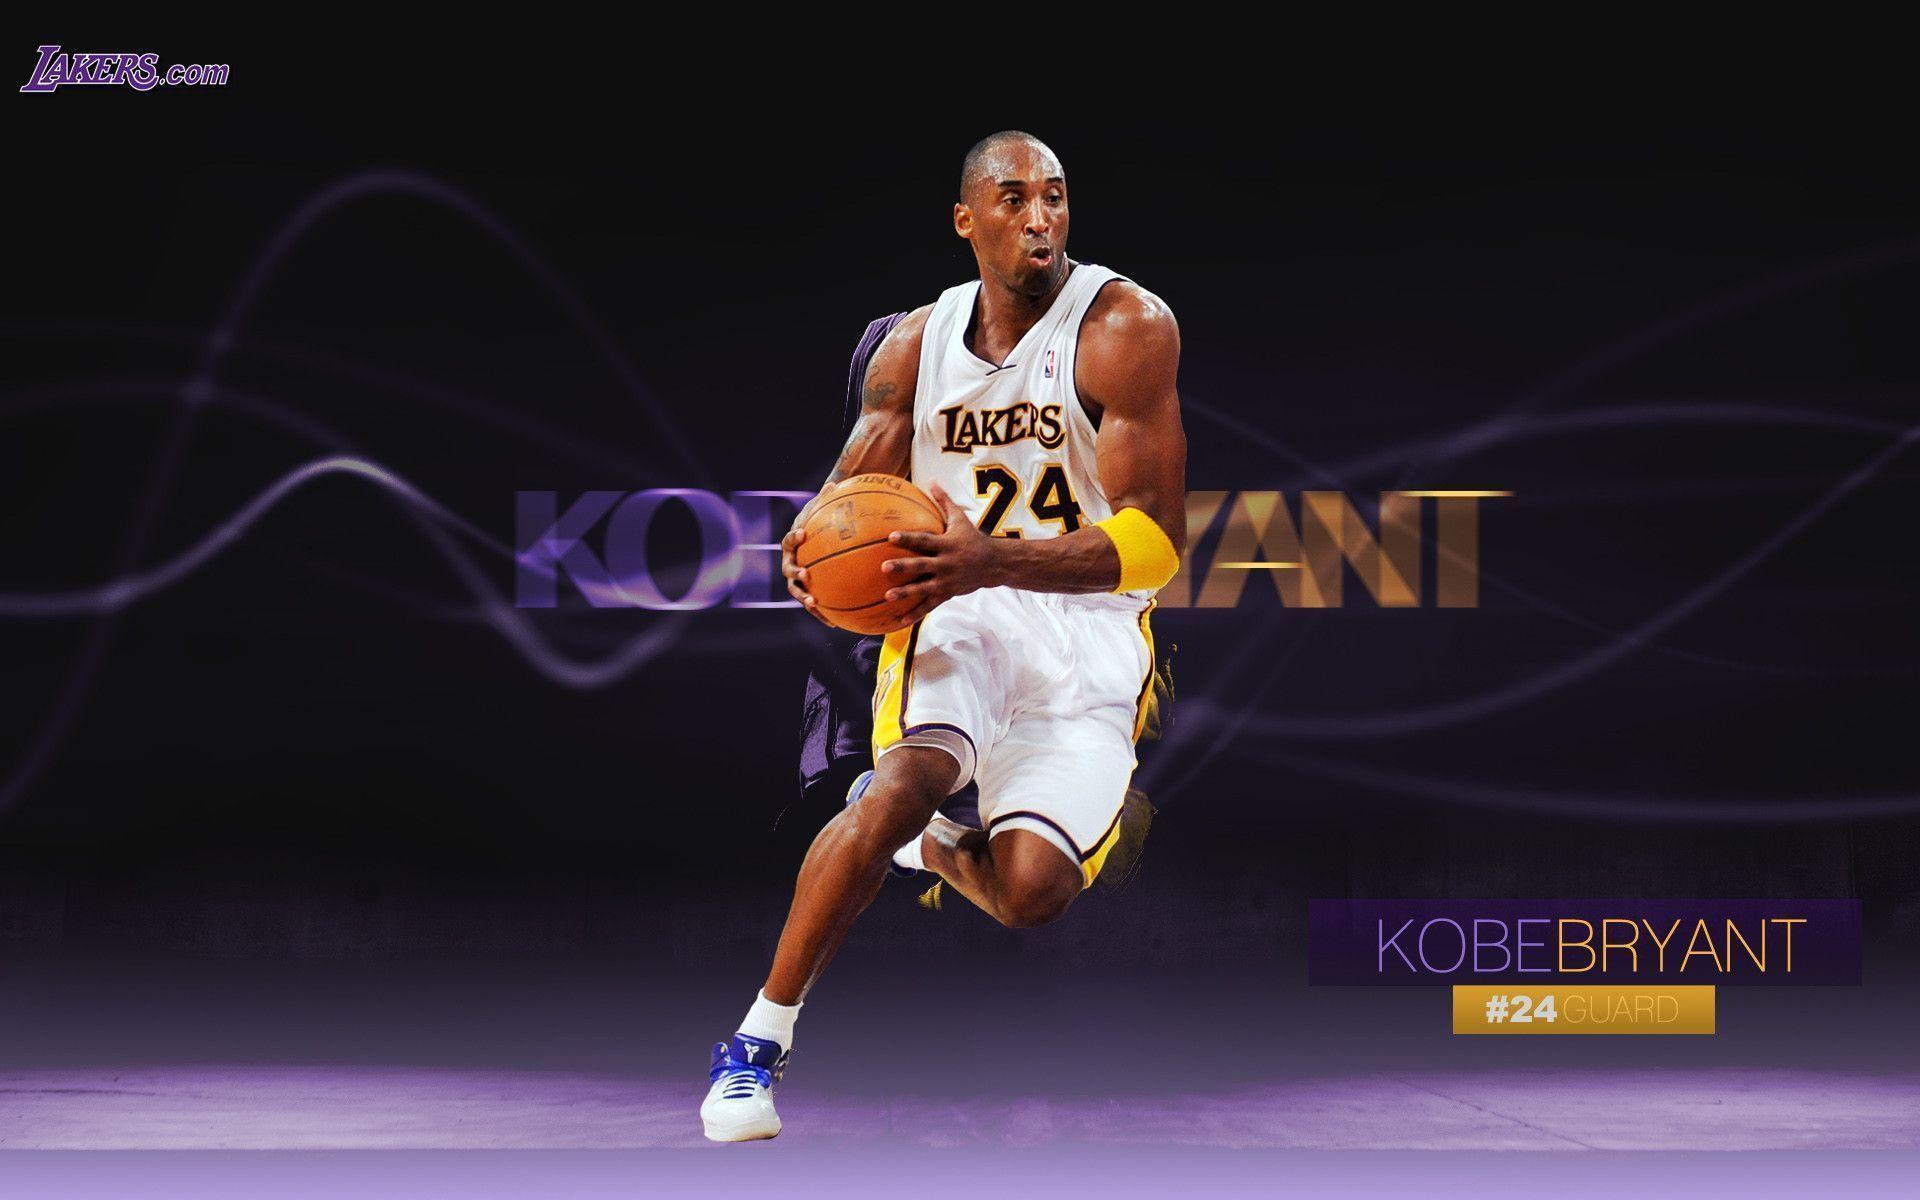 Lakers Desktop Wallpaper 2009 10. THE OFFICIAL SITE OF THE LOS